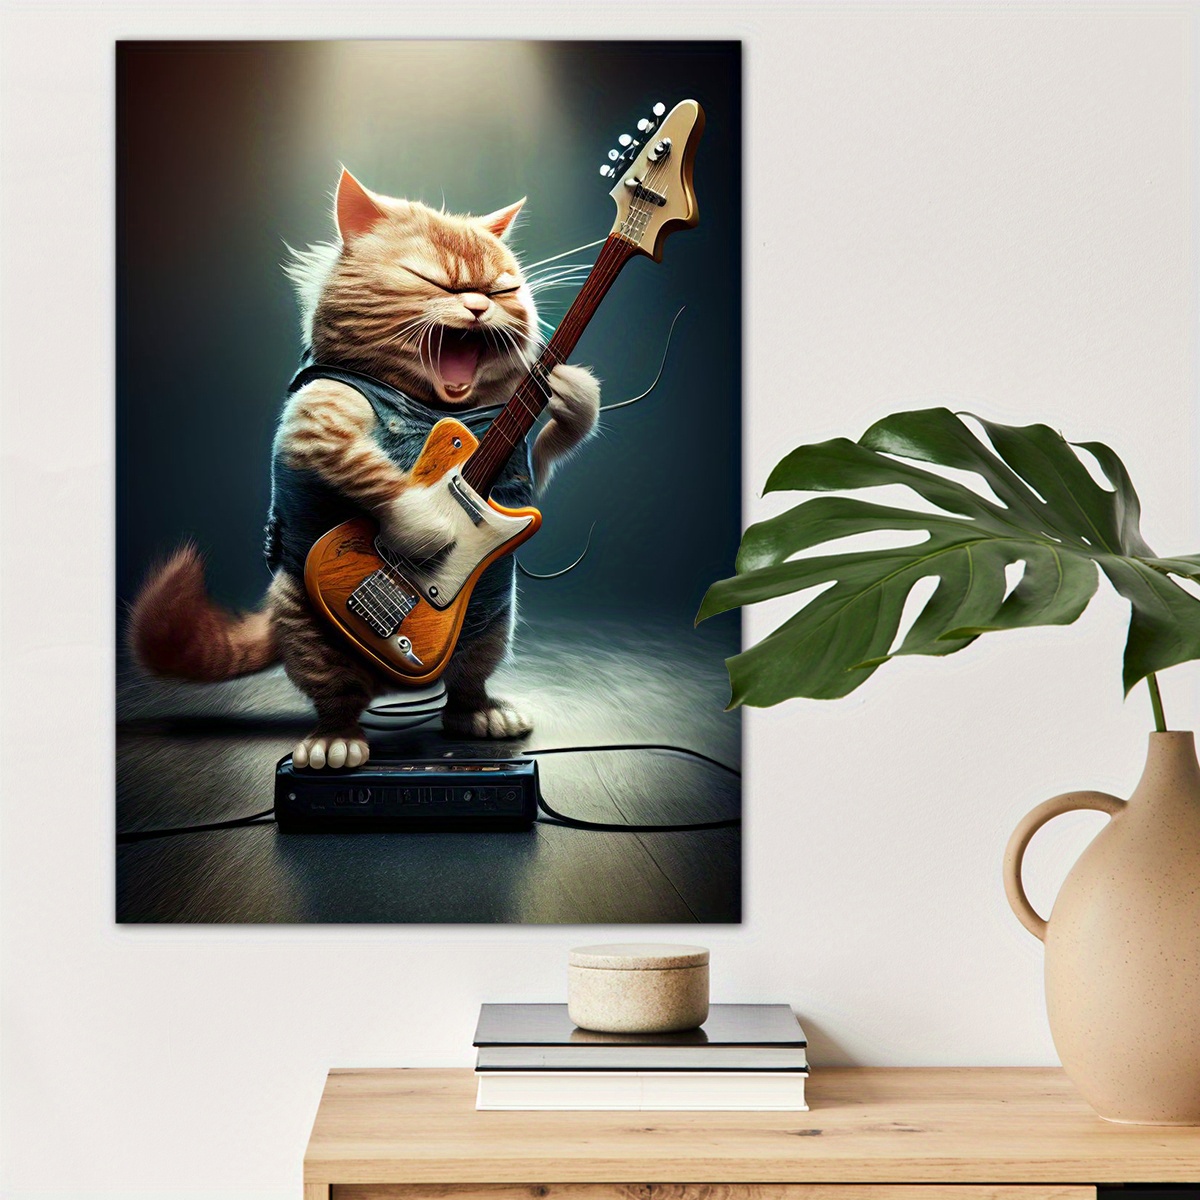 

1pc Cool Cat And Guitar Canvas Wall Art For Home Decor, High Quality Wall Decor, Canvas Prints For Living Room Bedroom Bathroom Kitchen Office Cafe Decor, Perfect Gift And Decoration